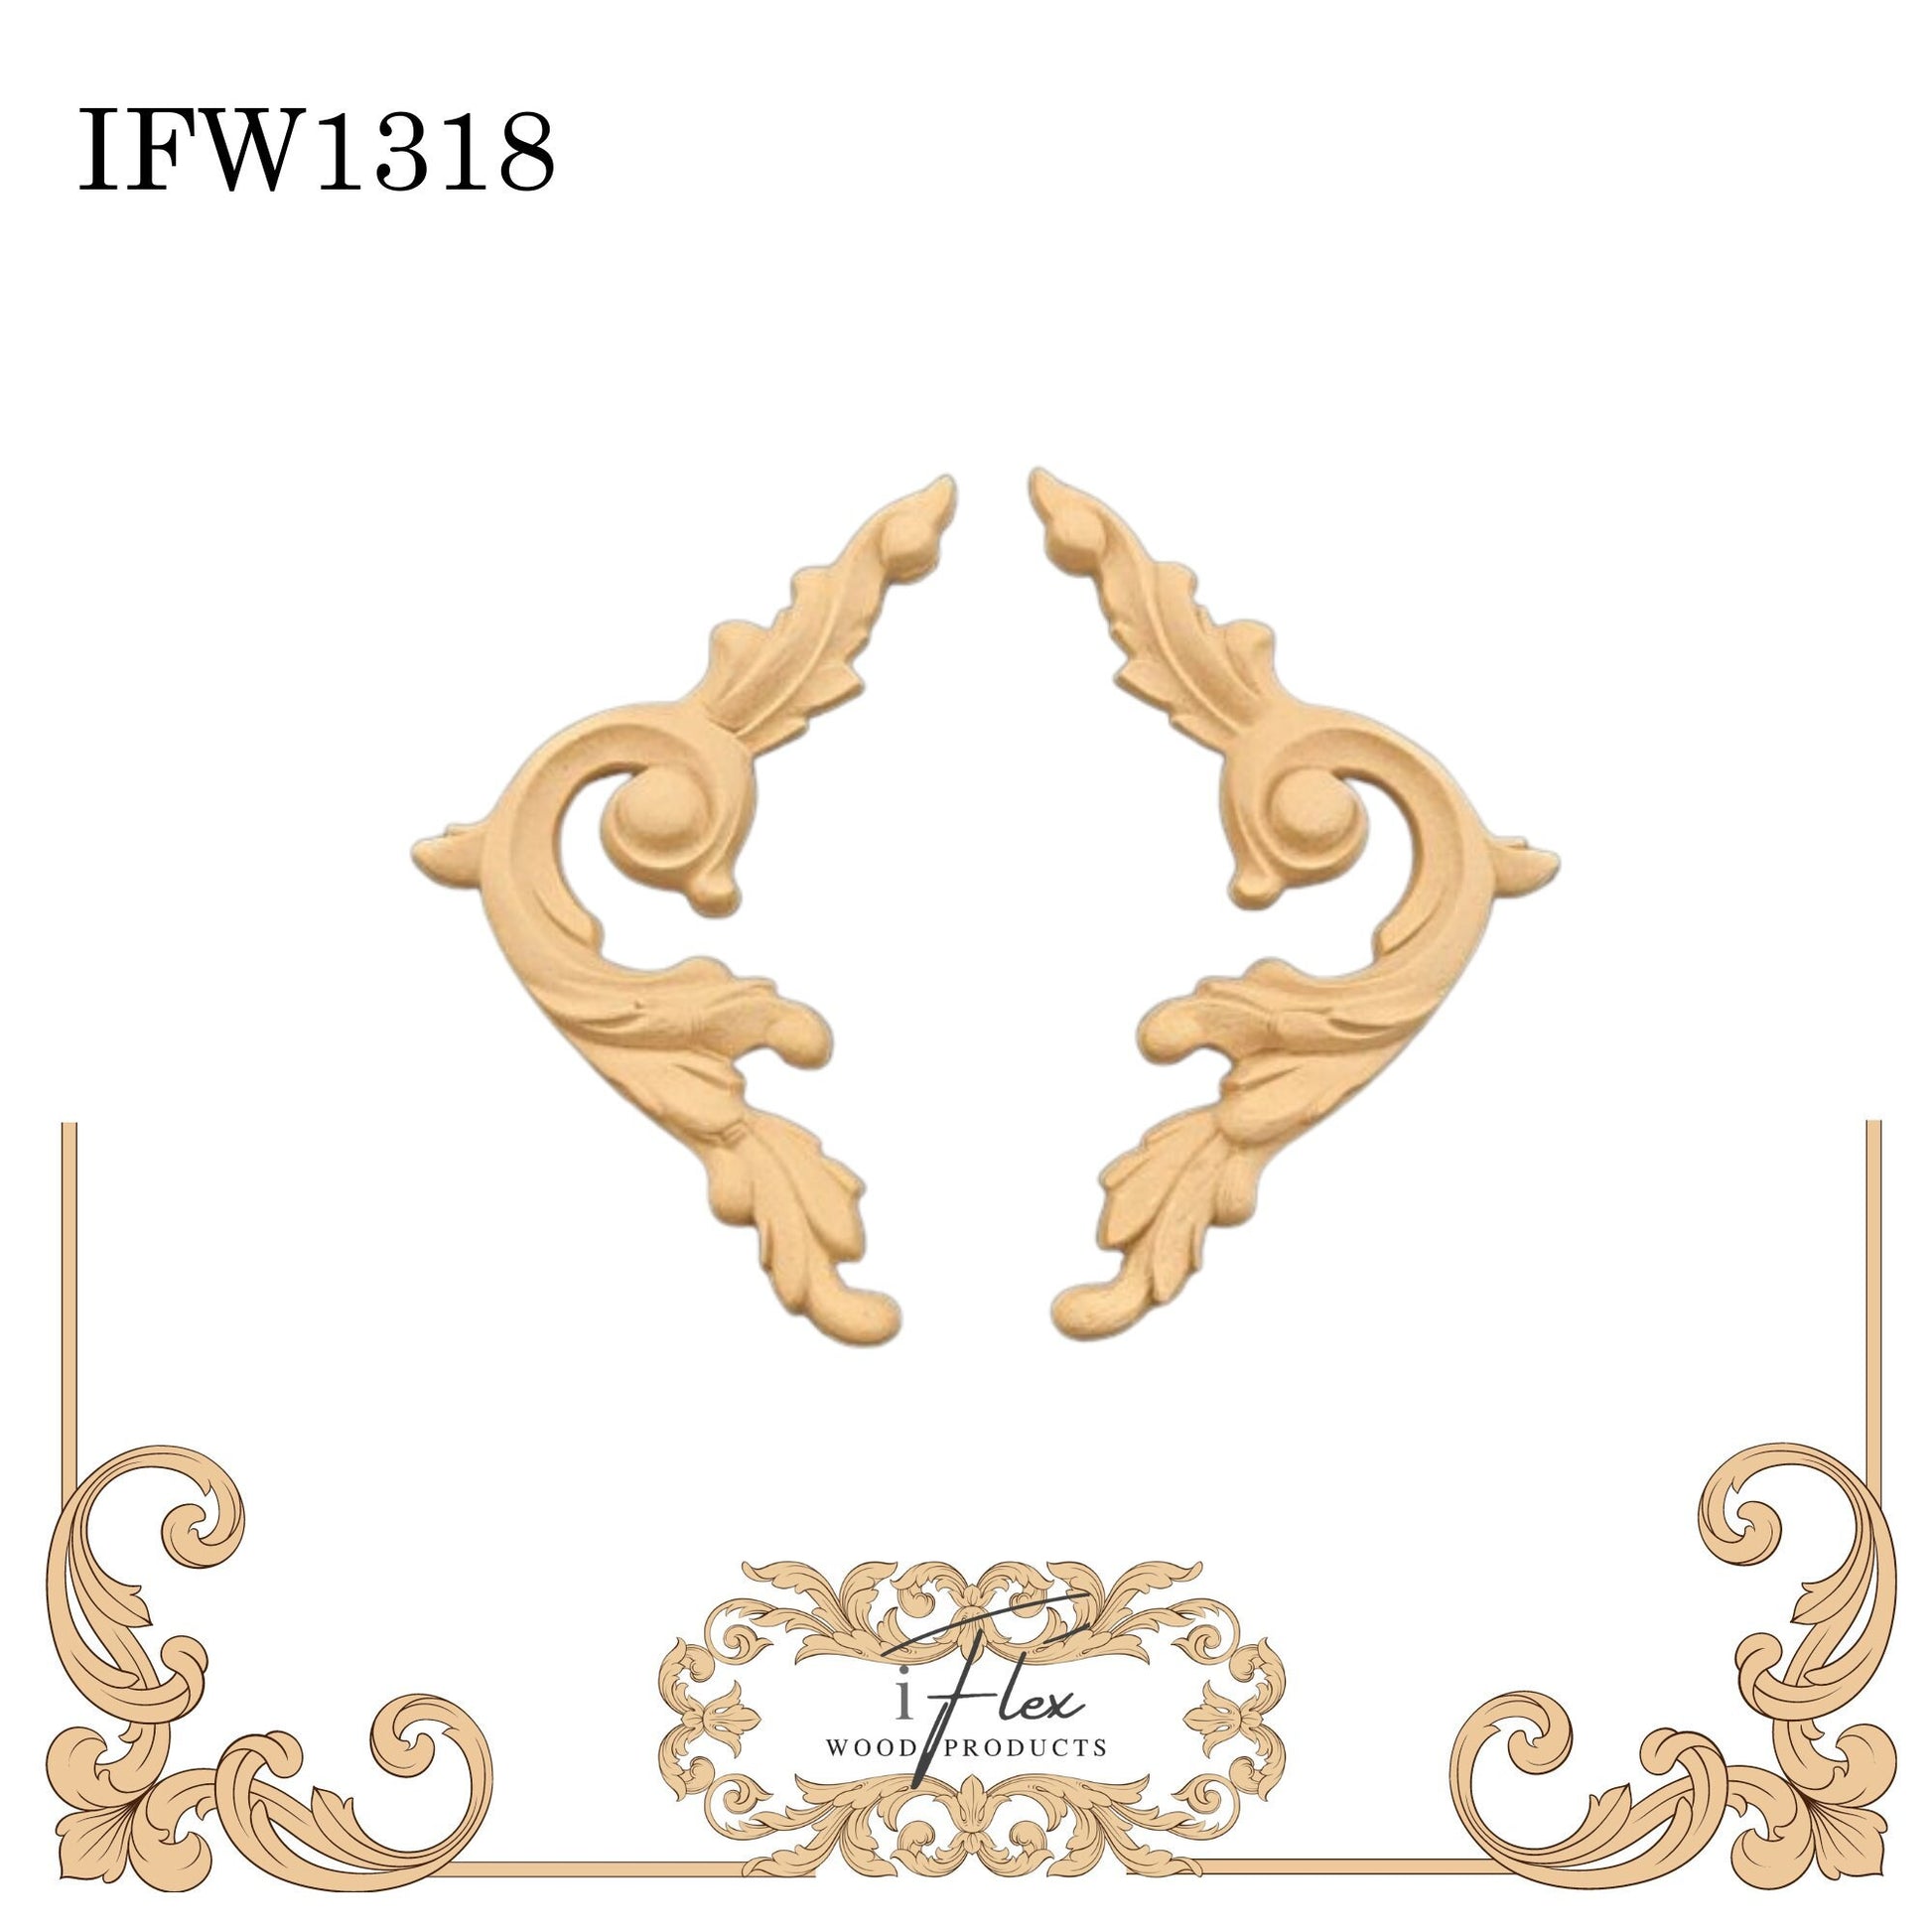 IFW 1318-1319 iFlex Wood Products, bendable mouldings, flexible, wooden appliques, pair corners